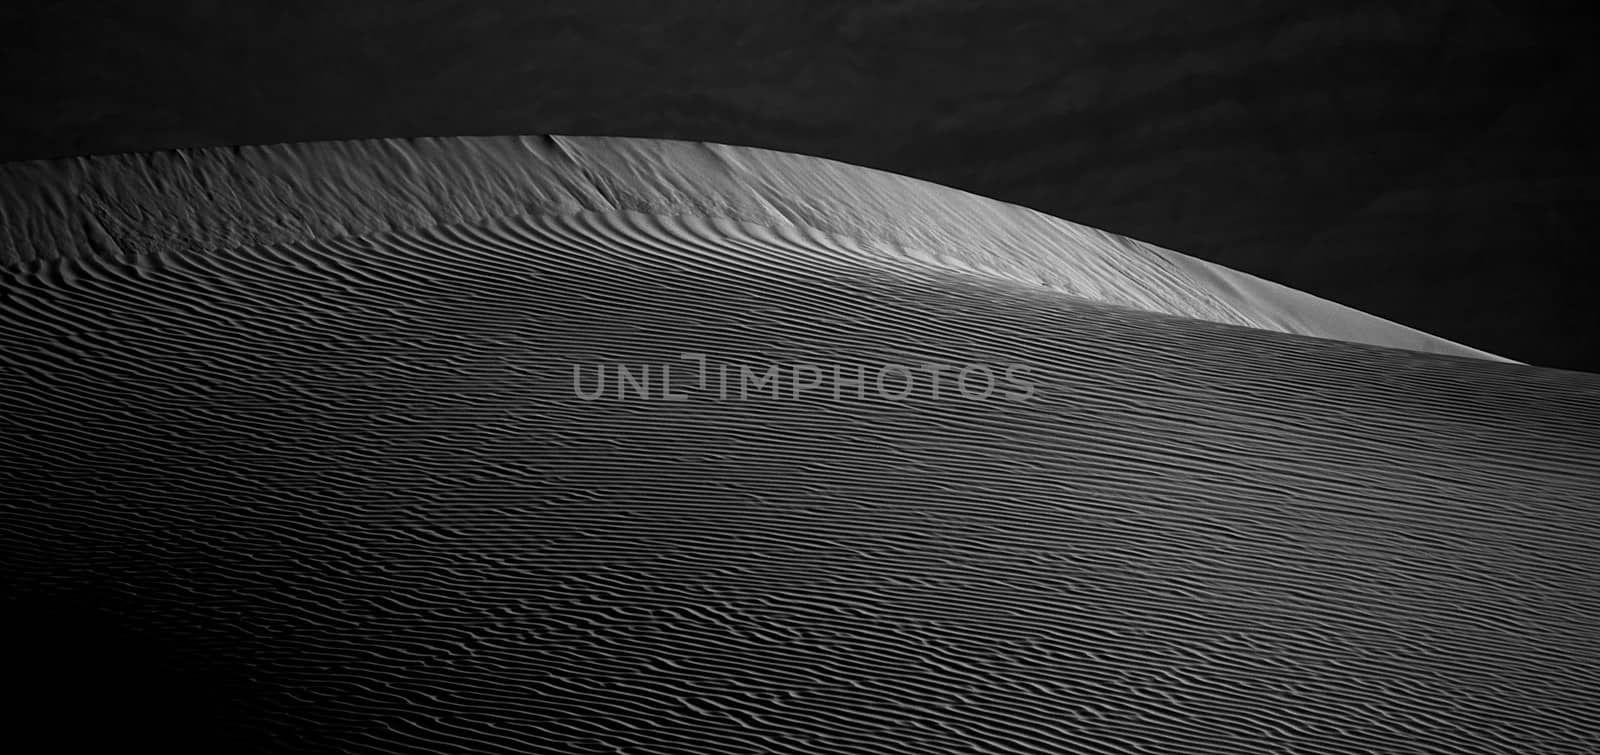 Beautiful Sand Dune Formations in Death Valley California by tobkatrina